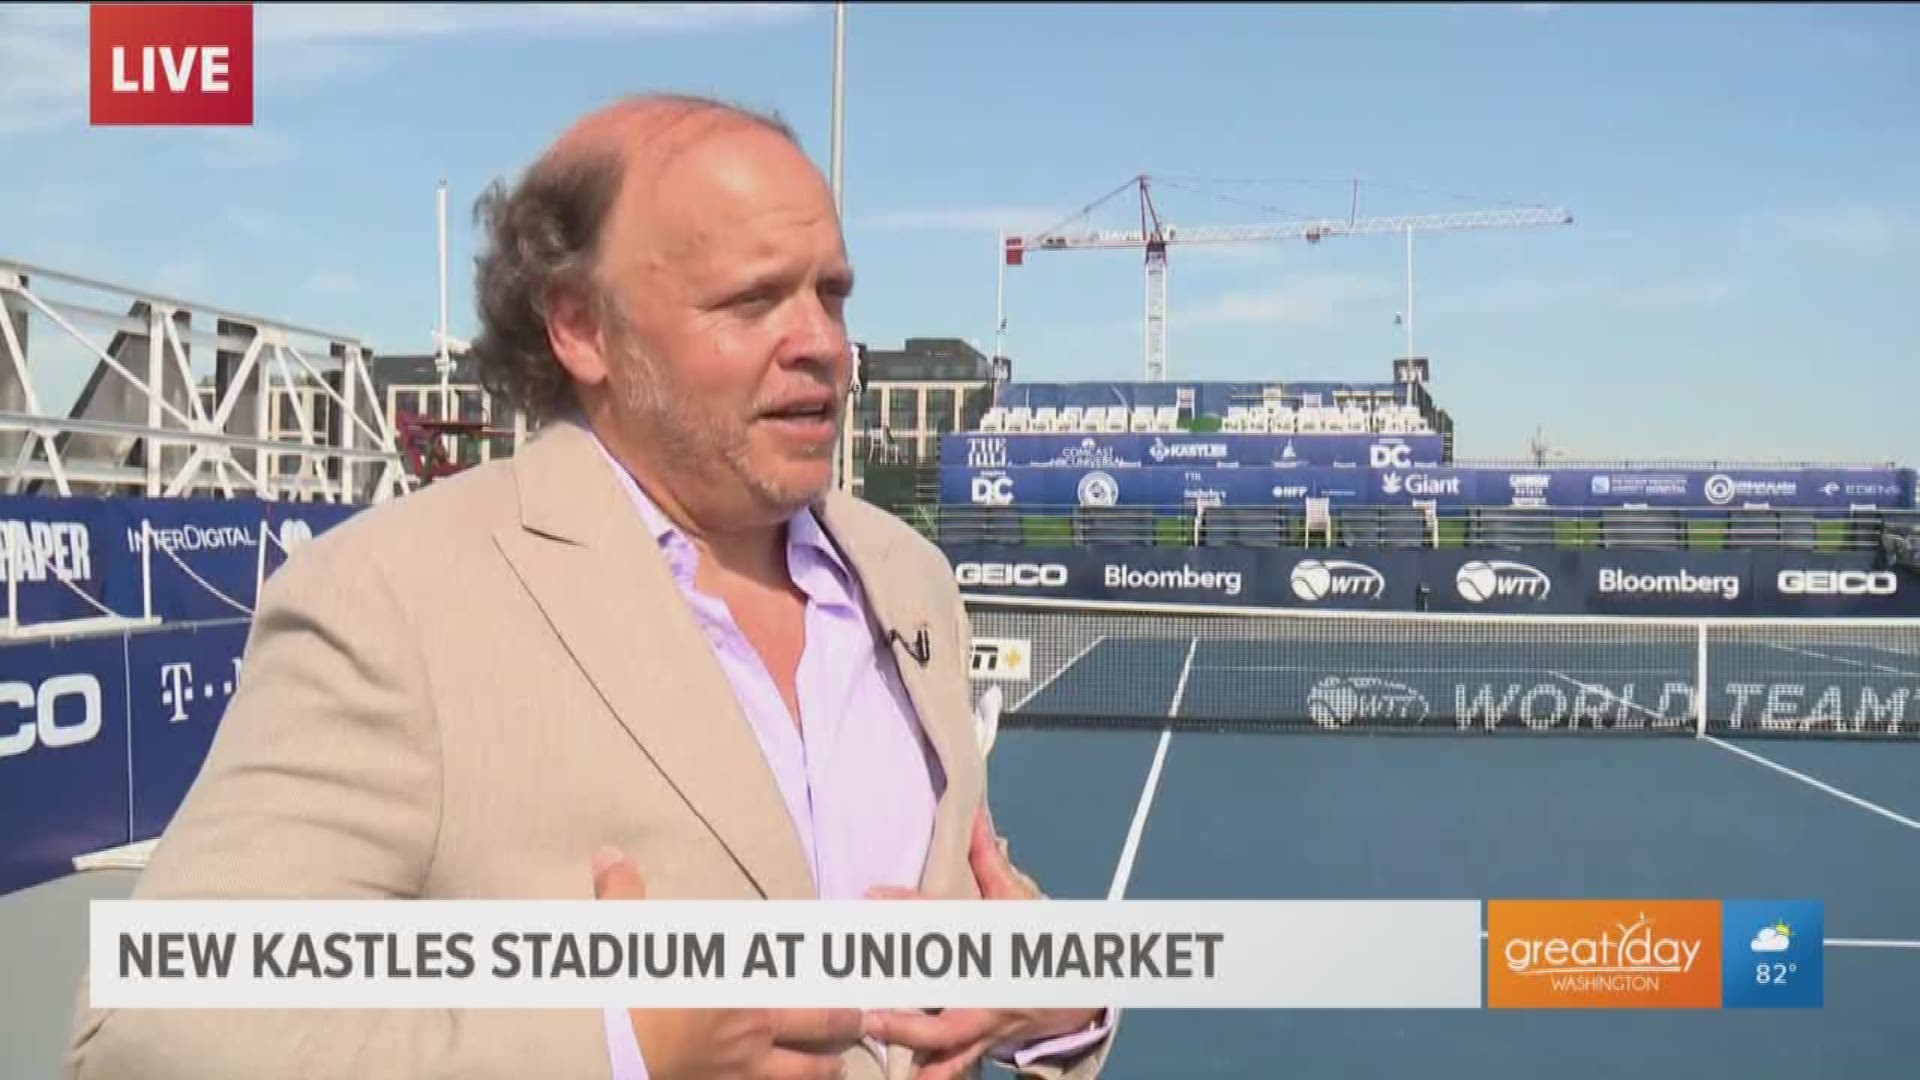 Mark Lin, owner of the Washington Kastles talks about how ecstatic the team members are at their new home, the rooftop at Union Market.